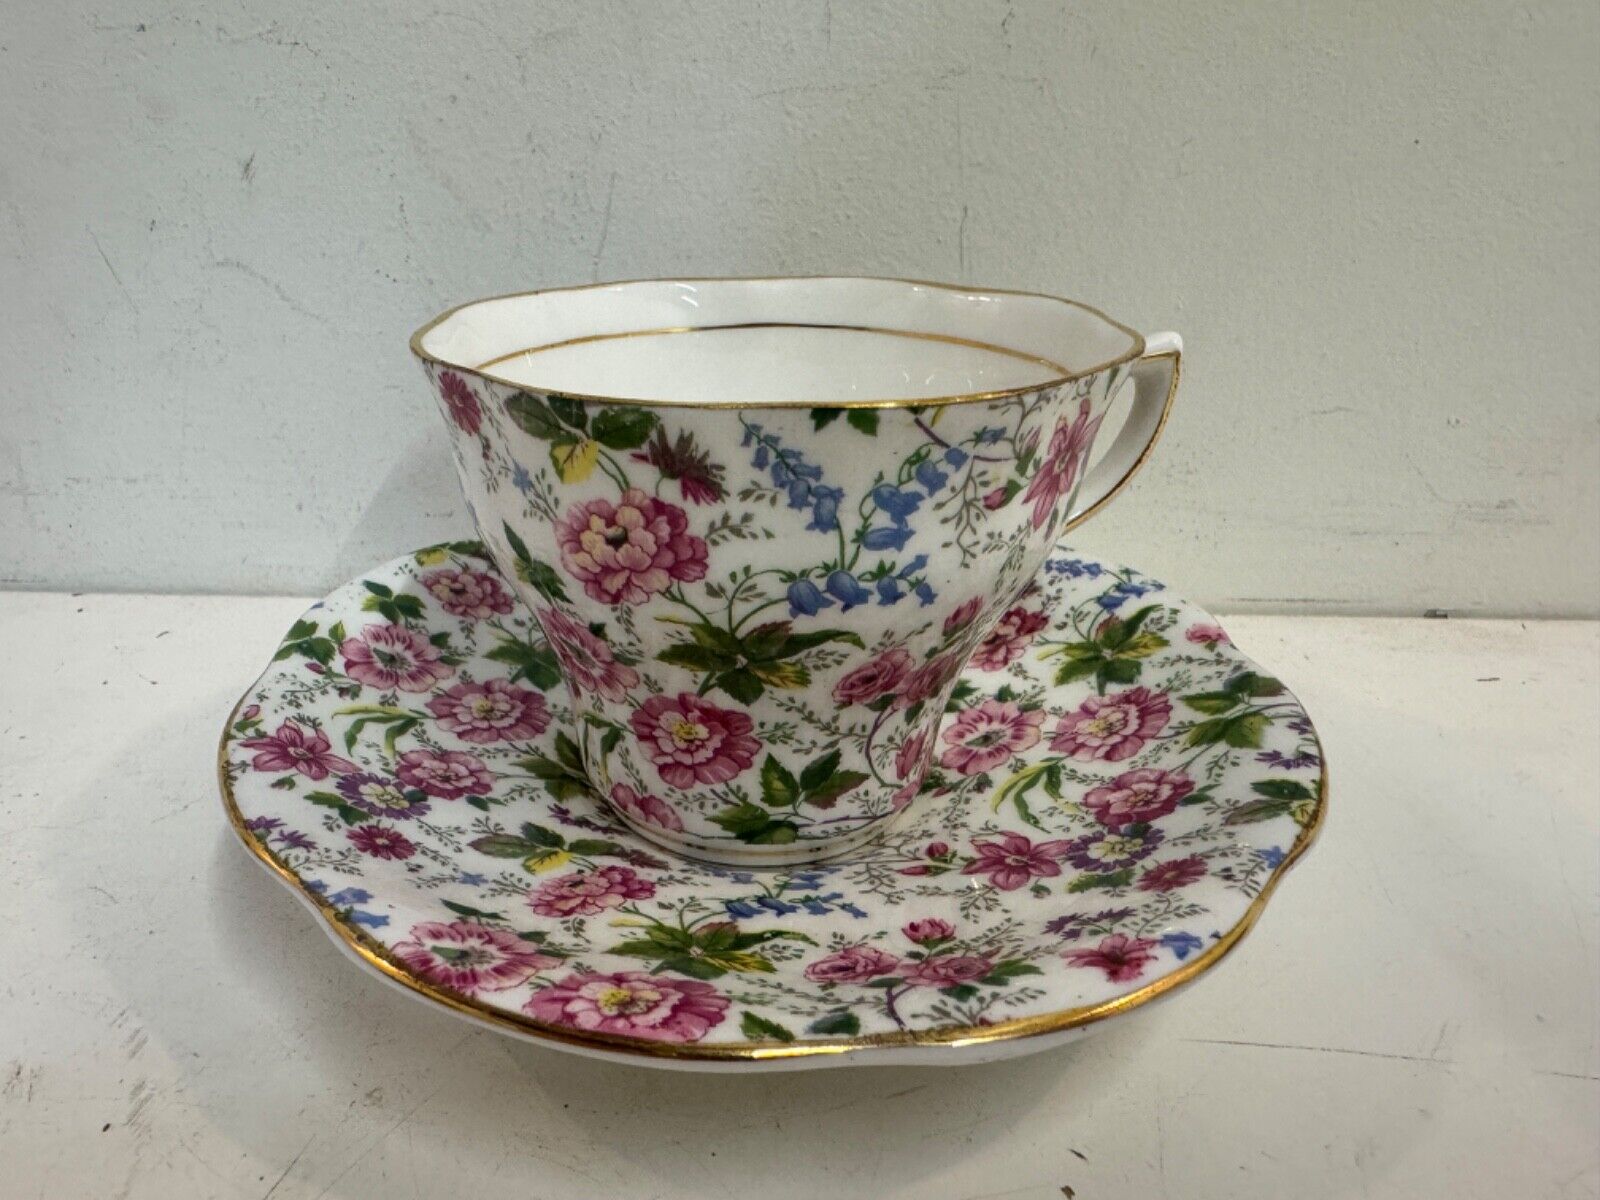 Vintage Rosina English Bone China Cup & Saucer with Pink Floral Decoration